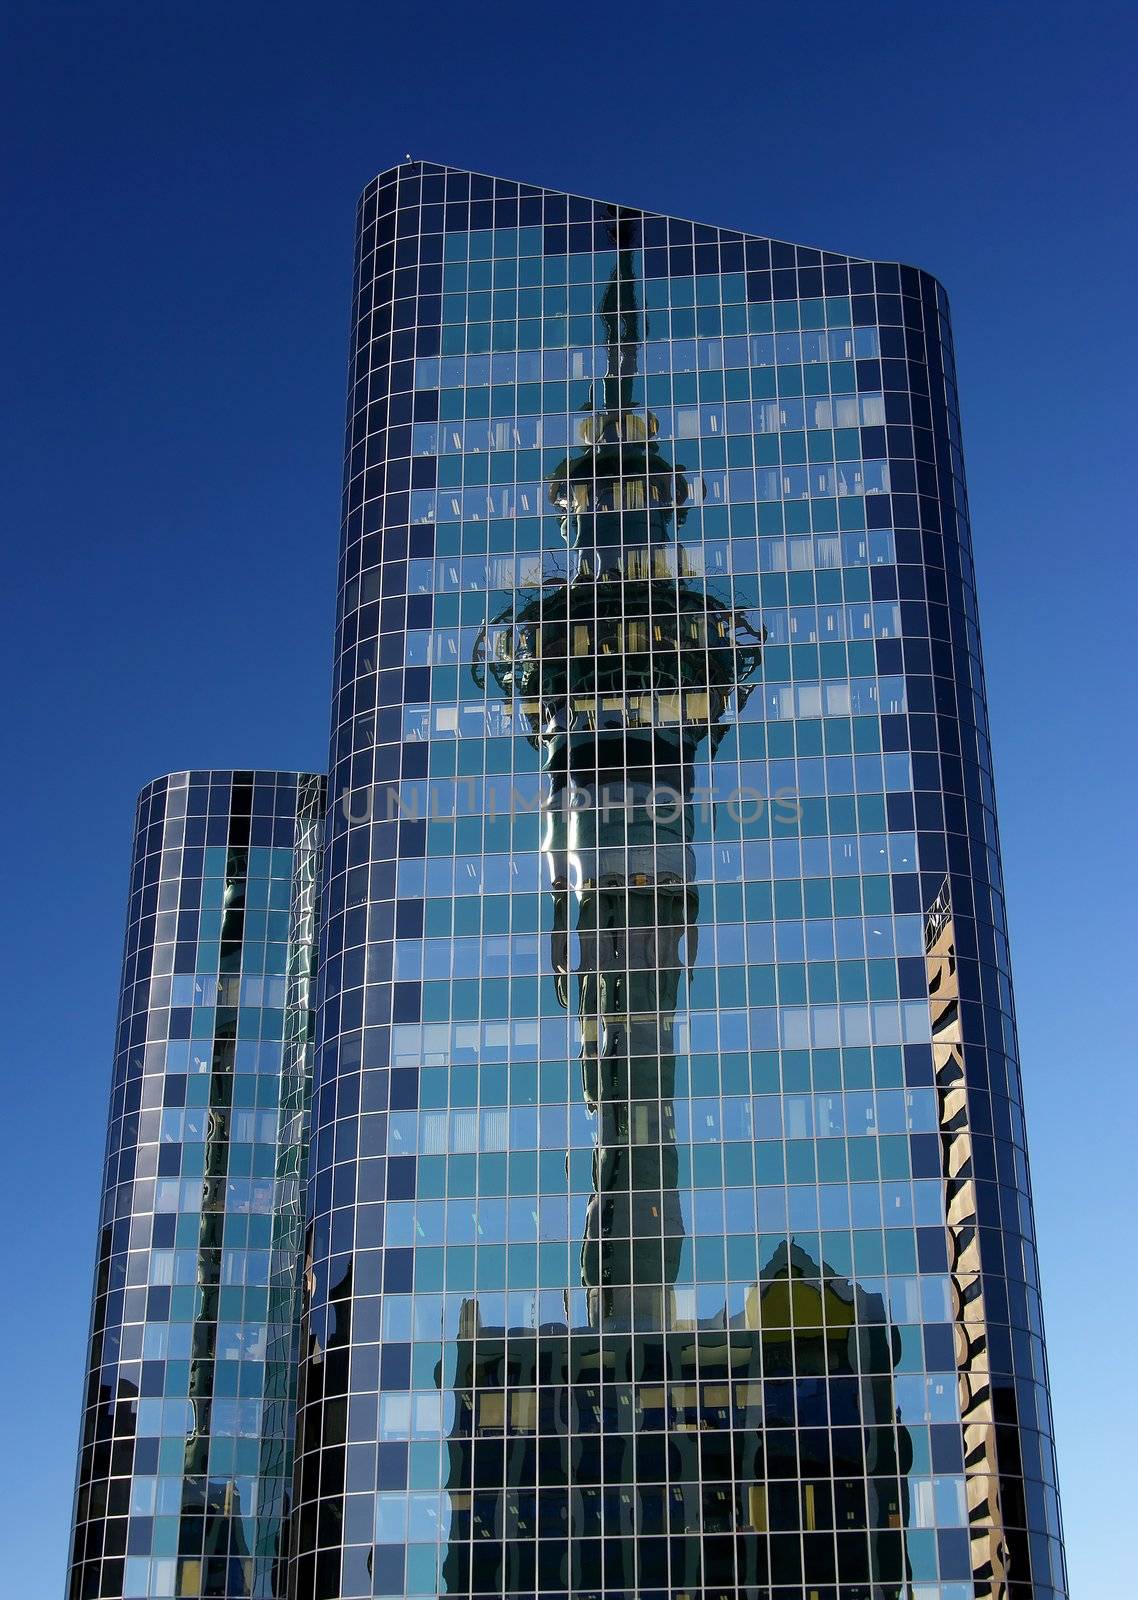 Sky Tower Reflection by clickbeetle